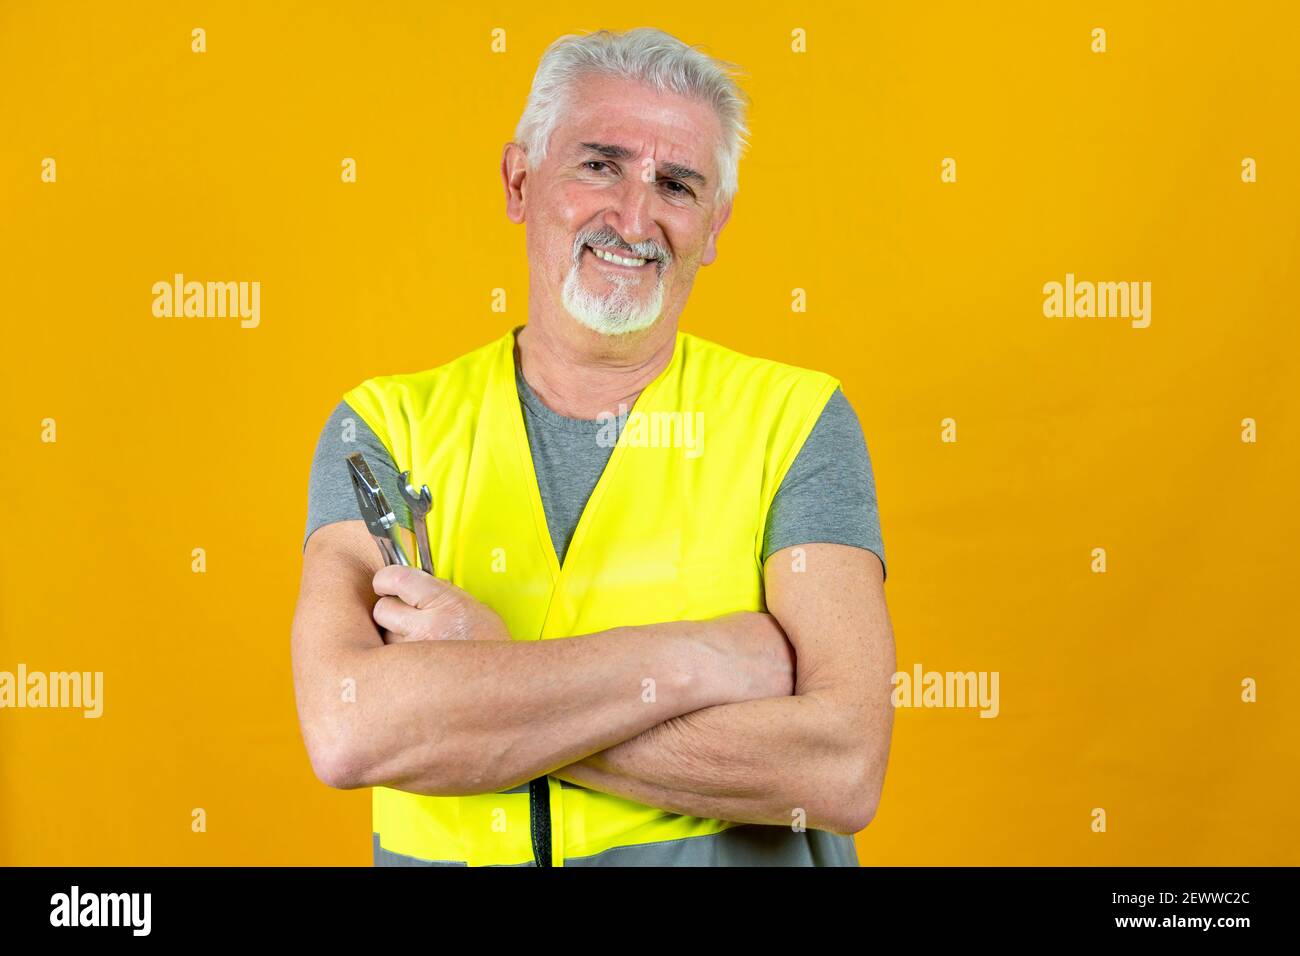 portrait of a mature worker wearing reflector vest showing tools isolated on yellow background Stock Photo